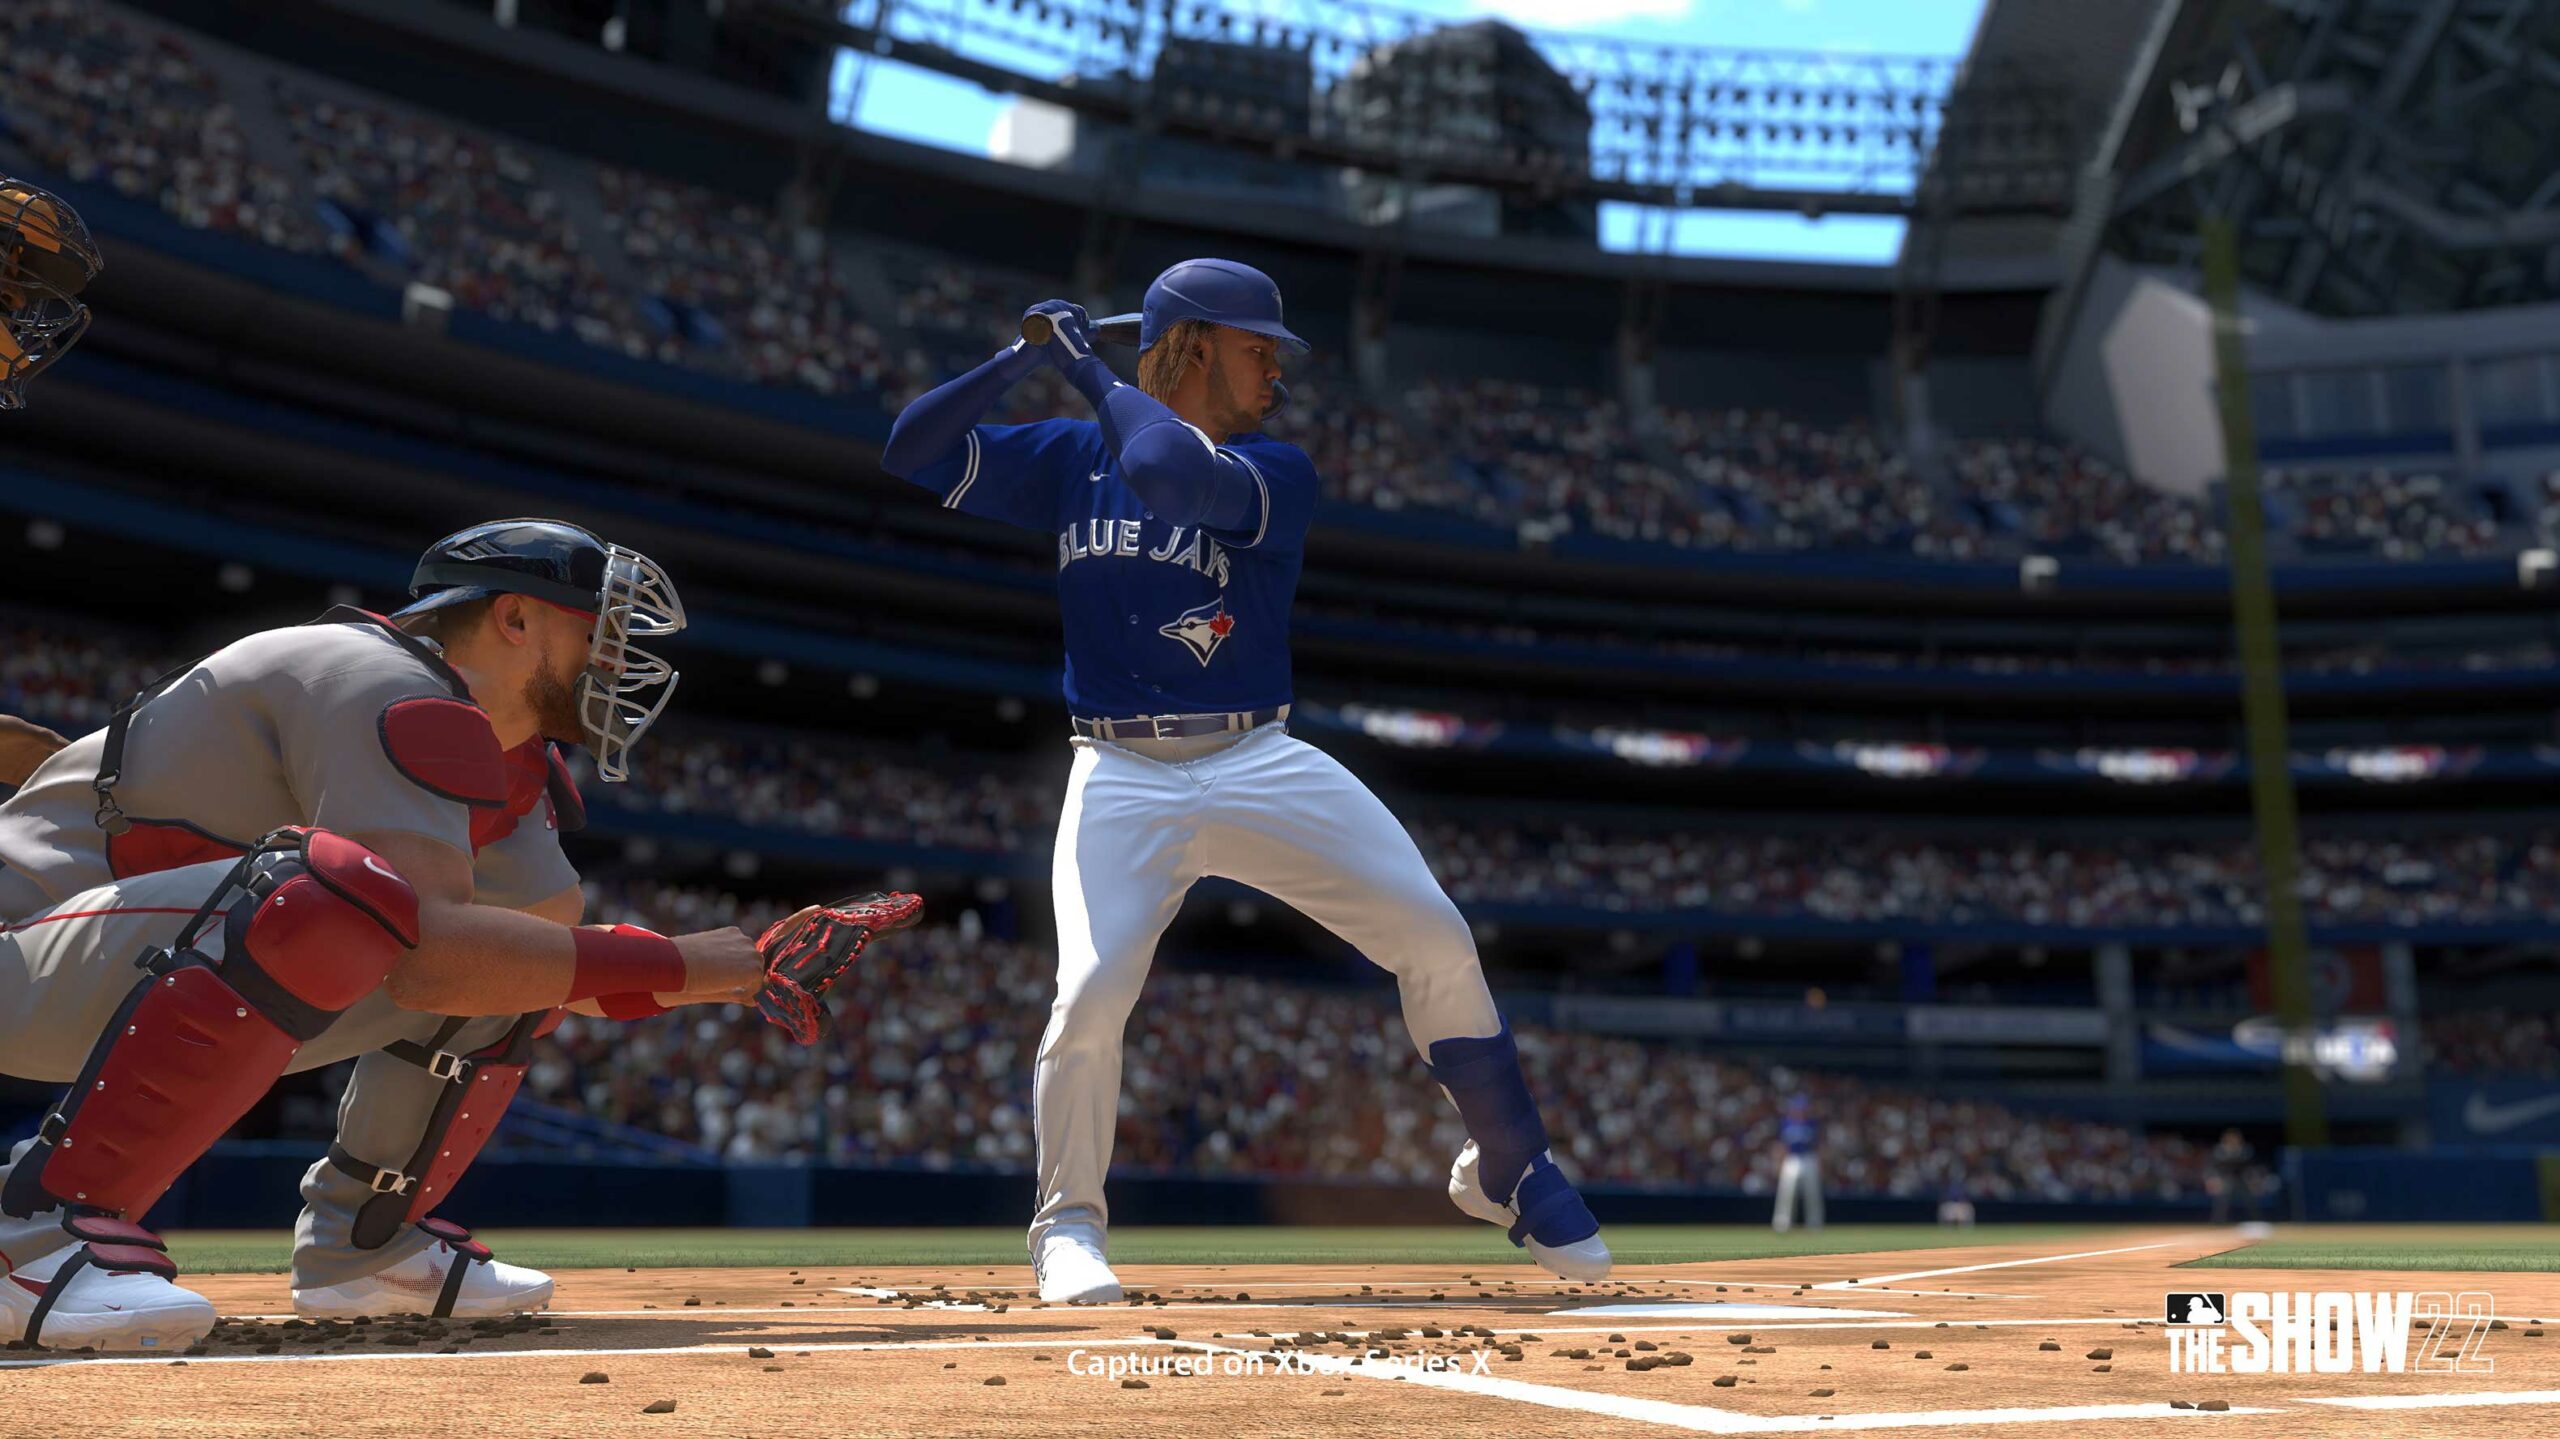 Xbox Game Pass adds Life is Strange: True Colors, MLB The Show 22